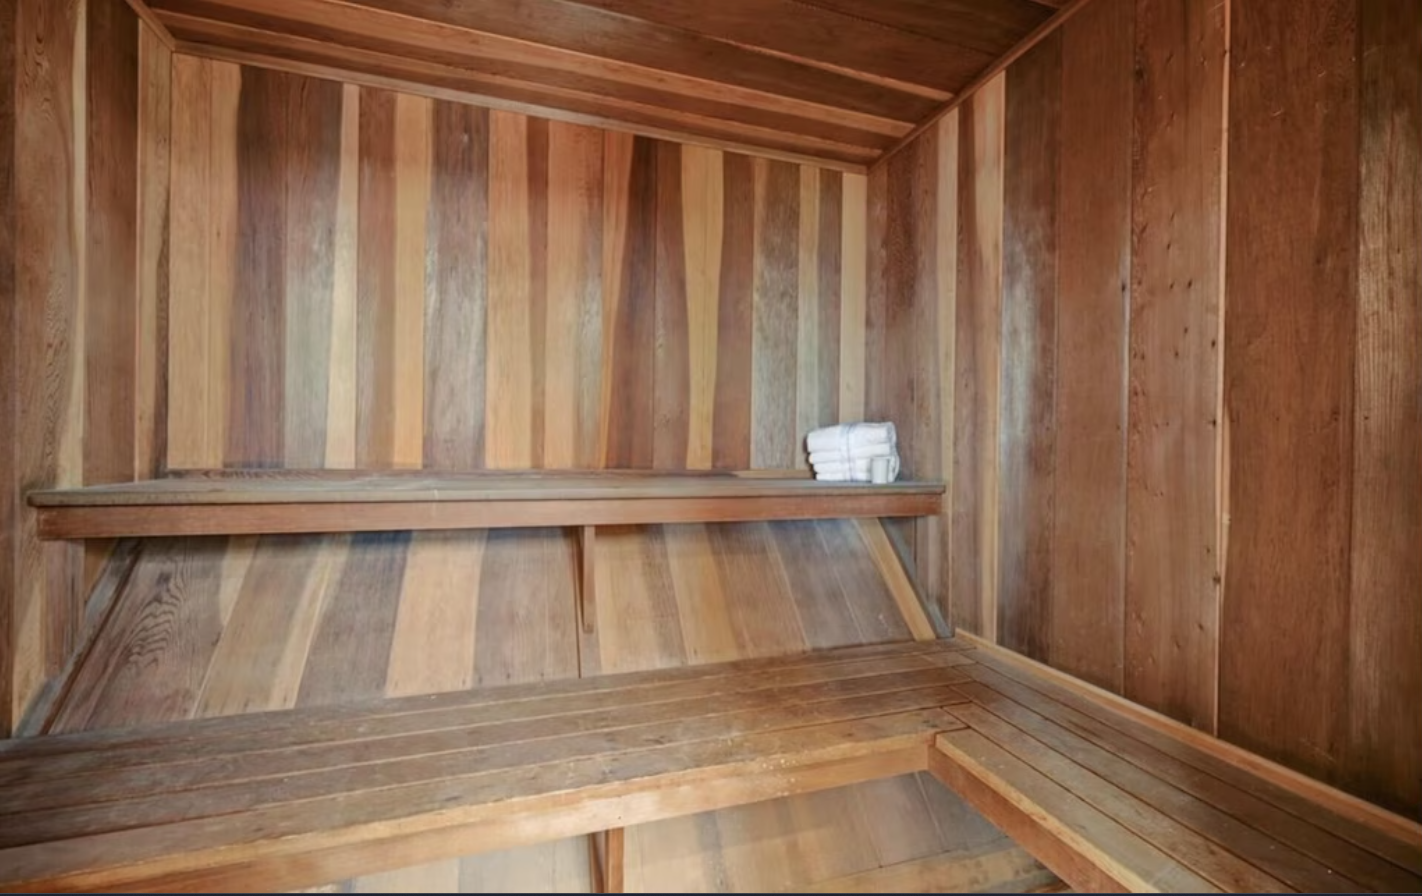 Experience the amazing and spacious sauna.